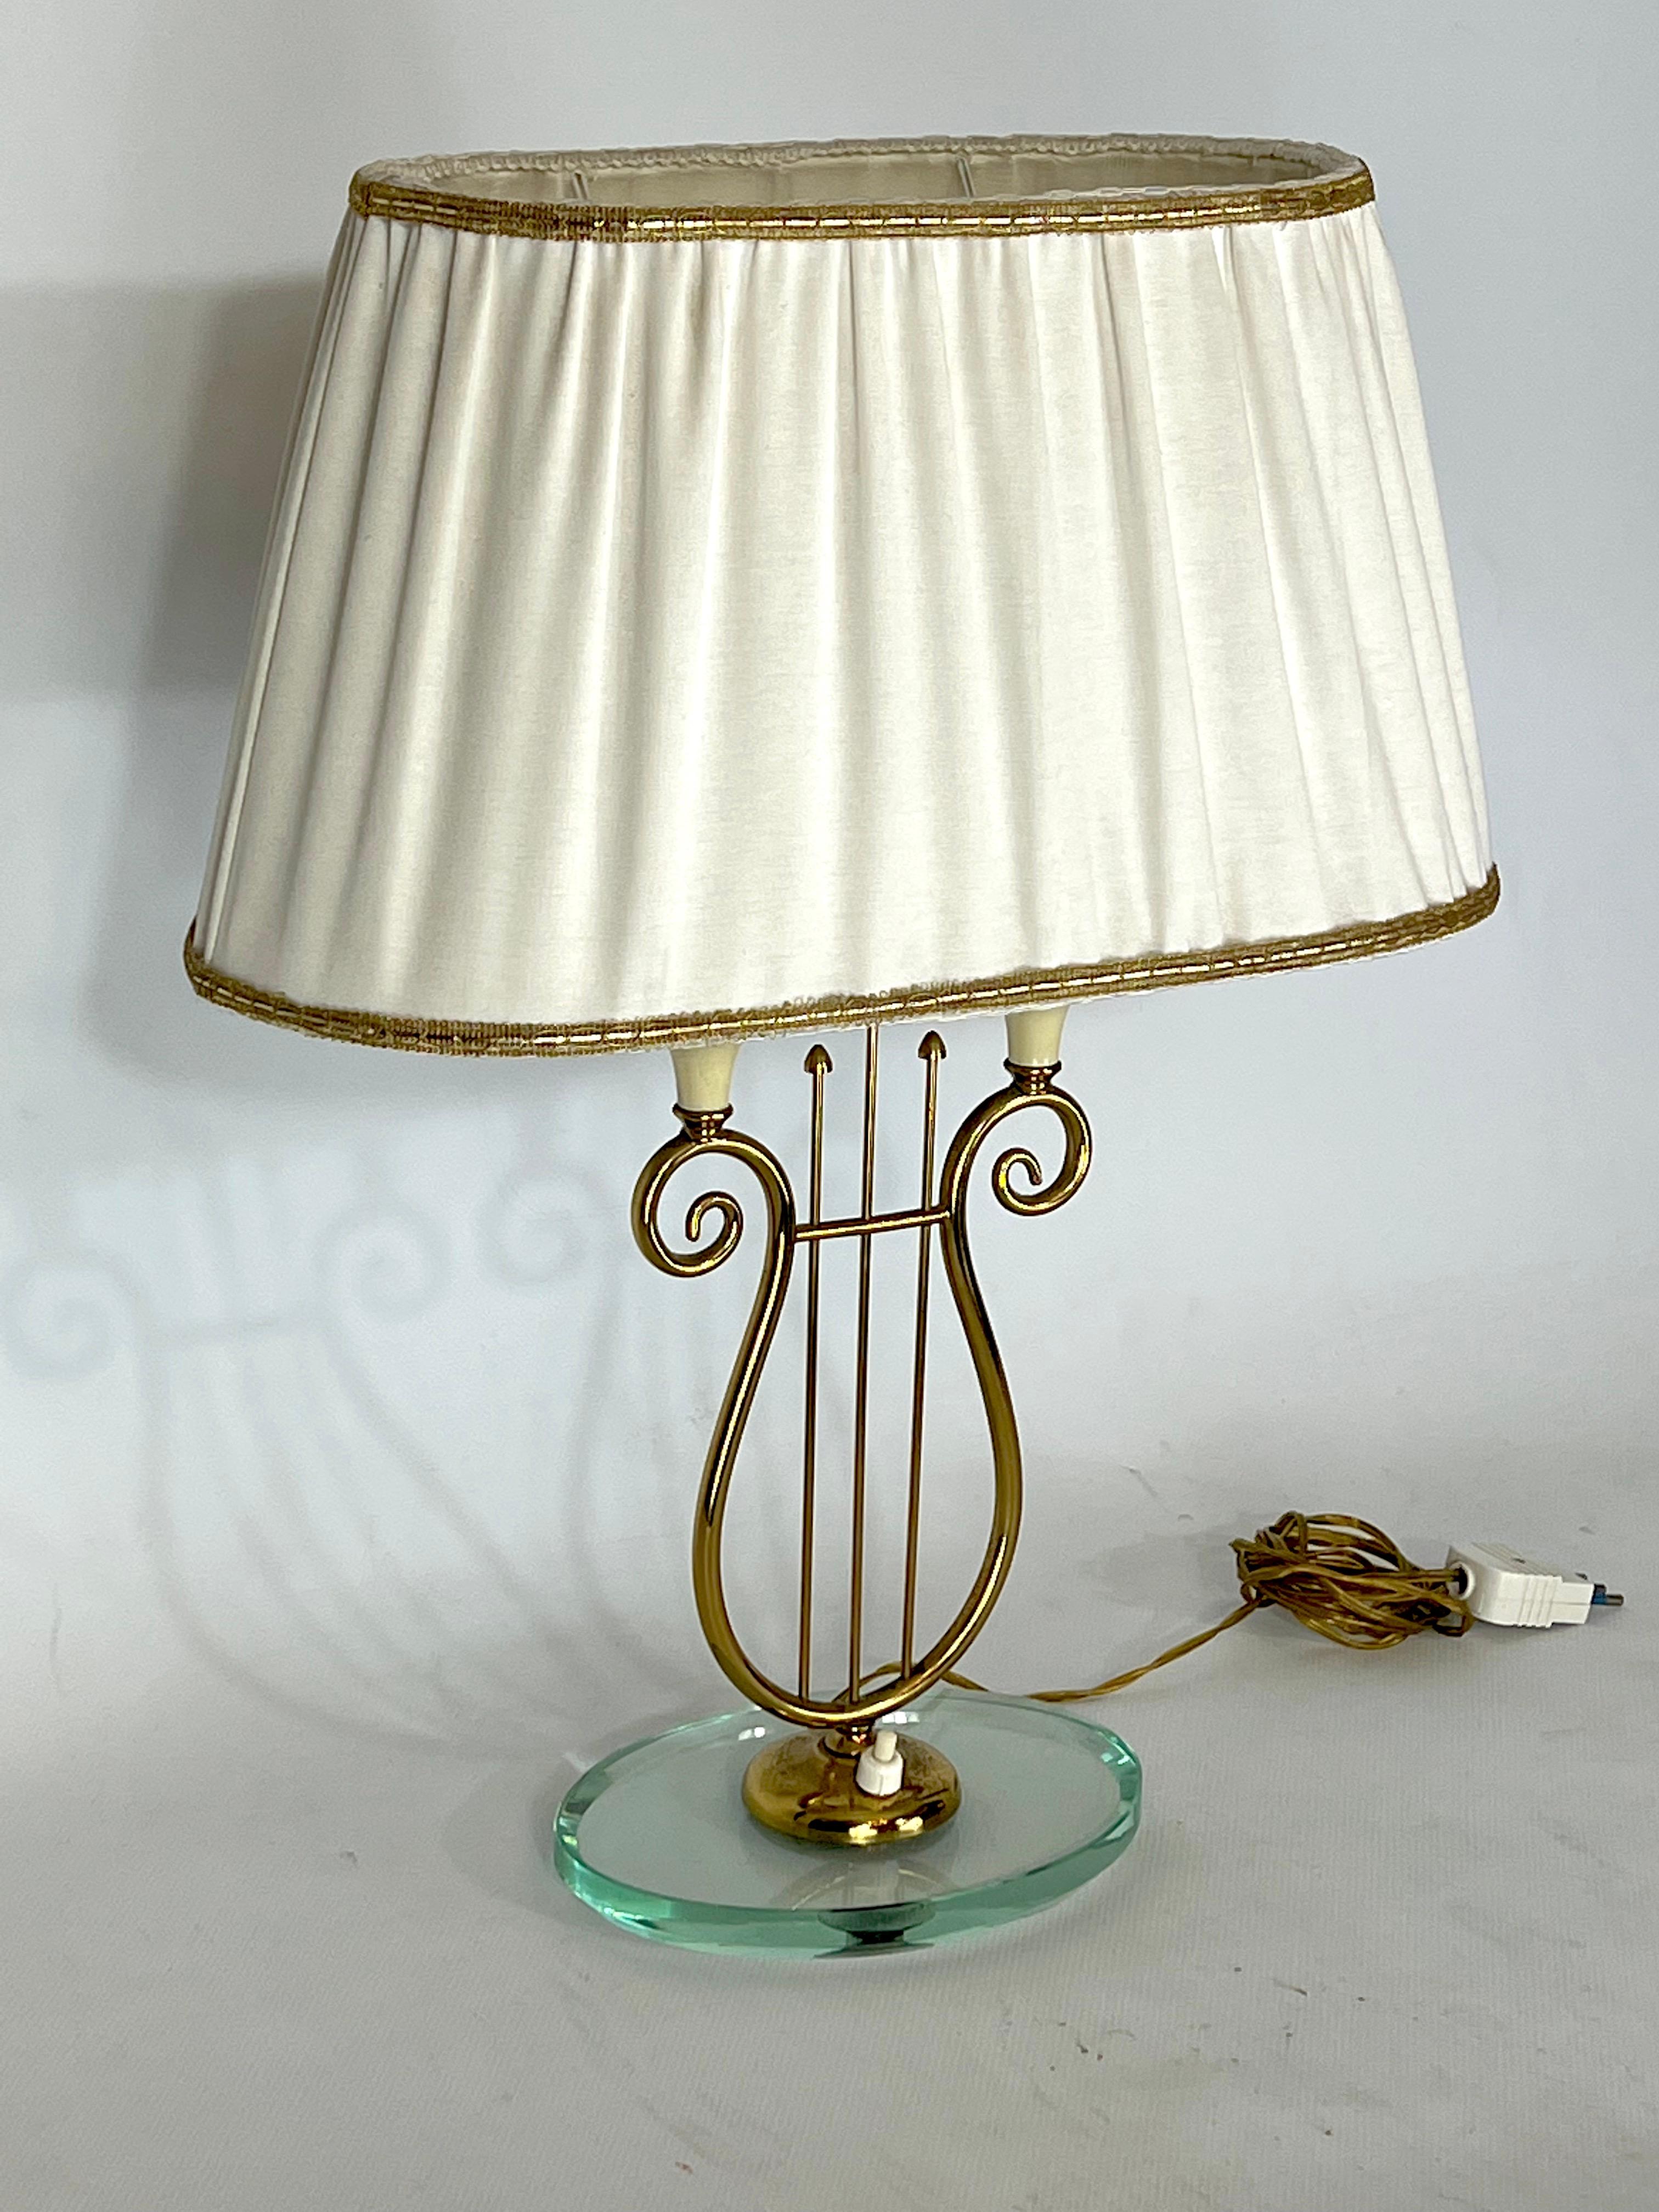 Italian Mid-Century Brass and Glass Table Lamp from 50s 1